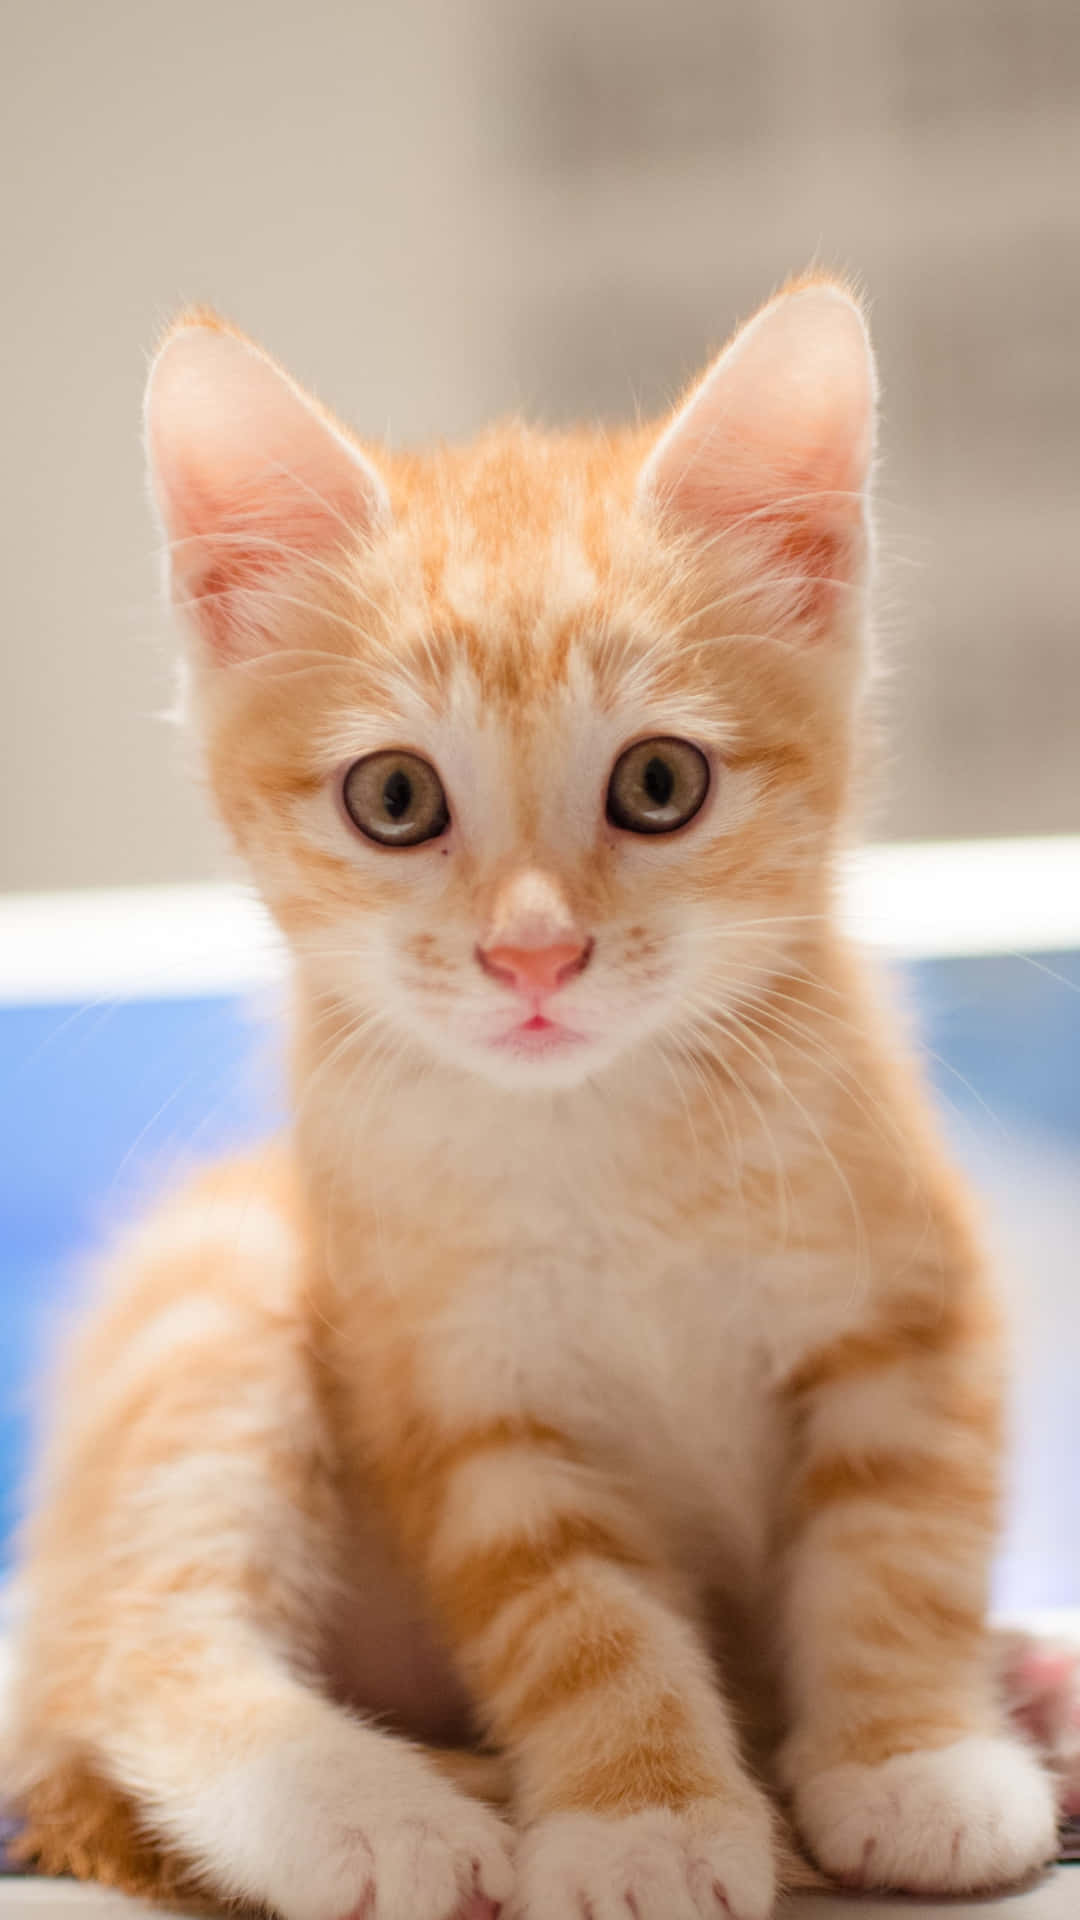 This cute little Kitten Cat will snuggle its way into your heart